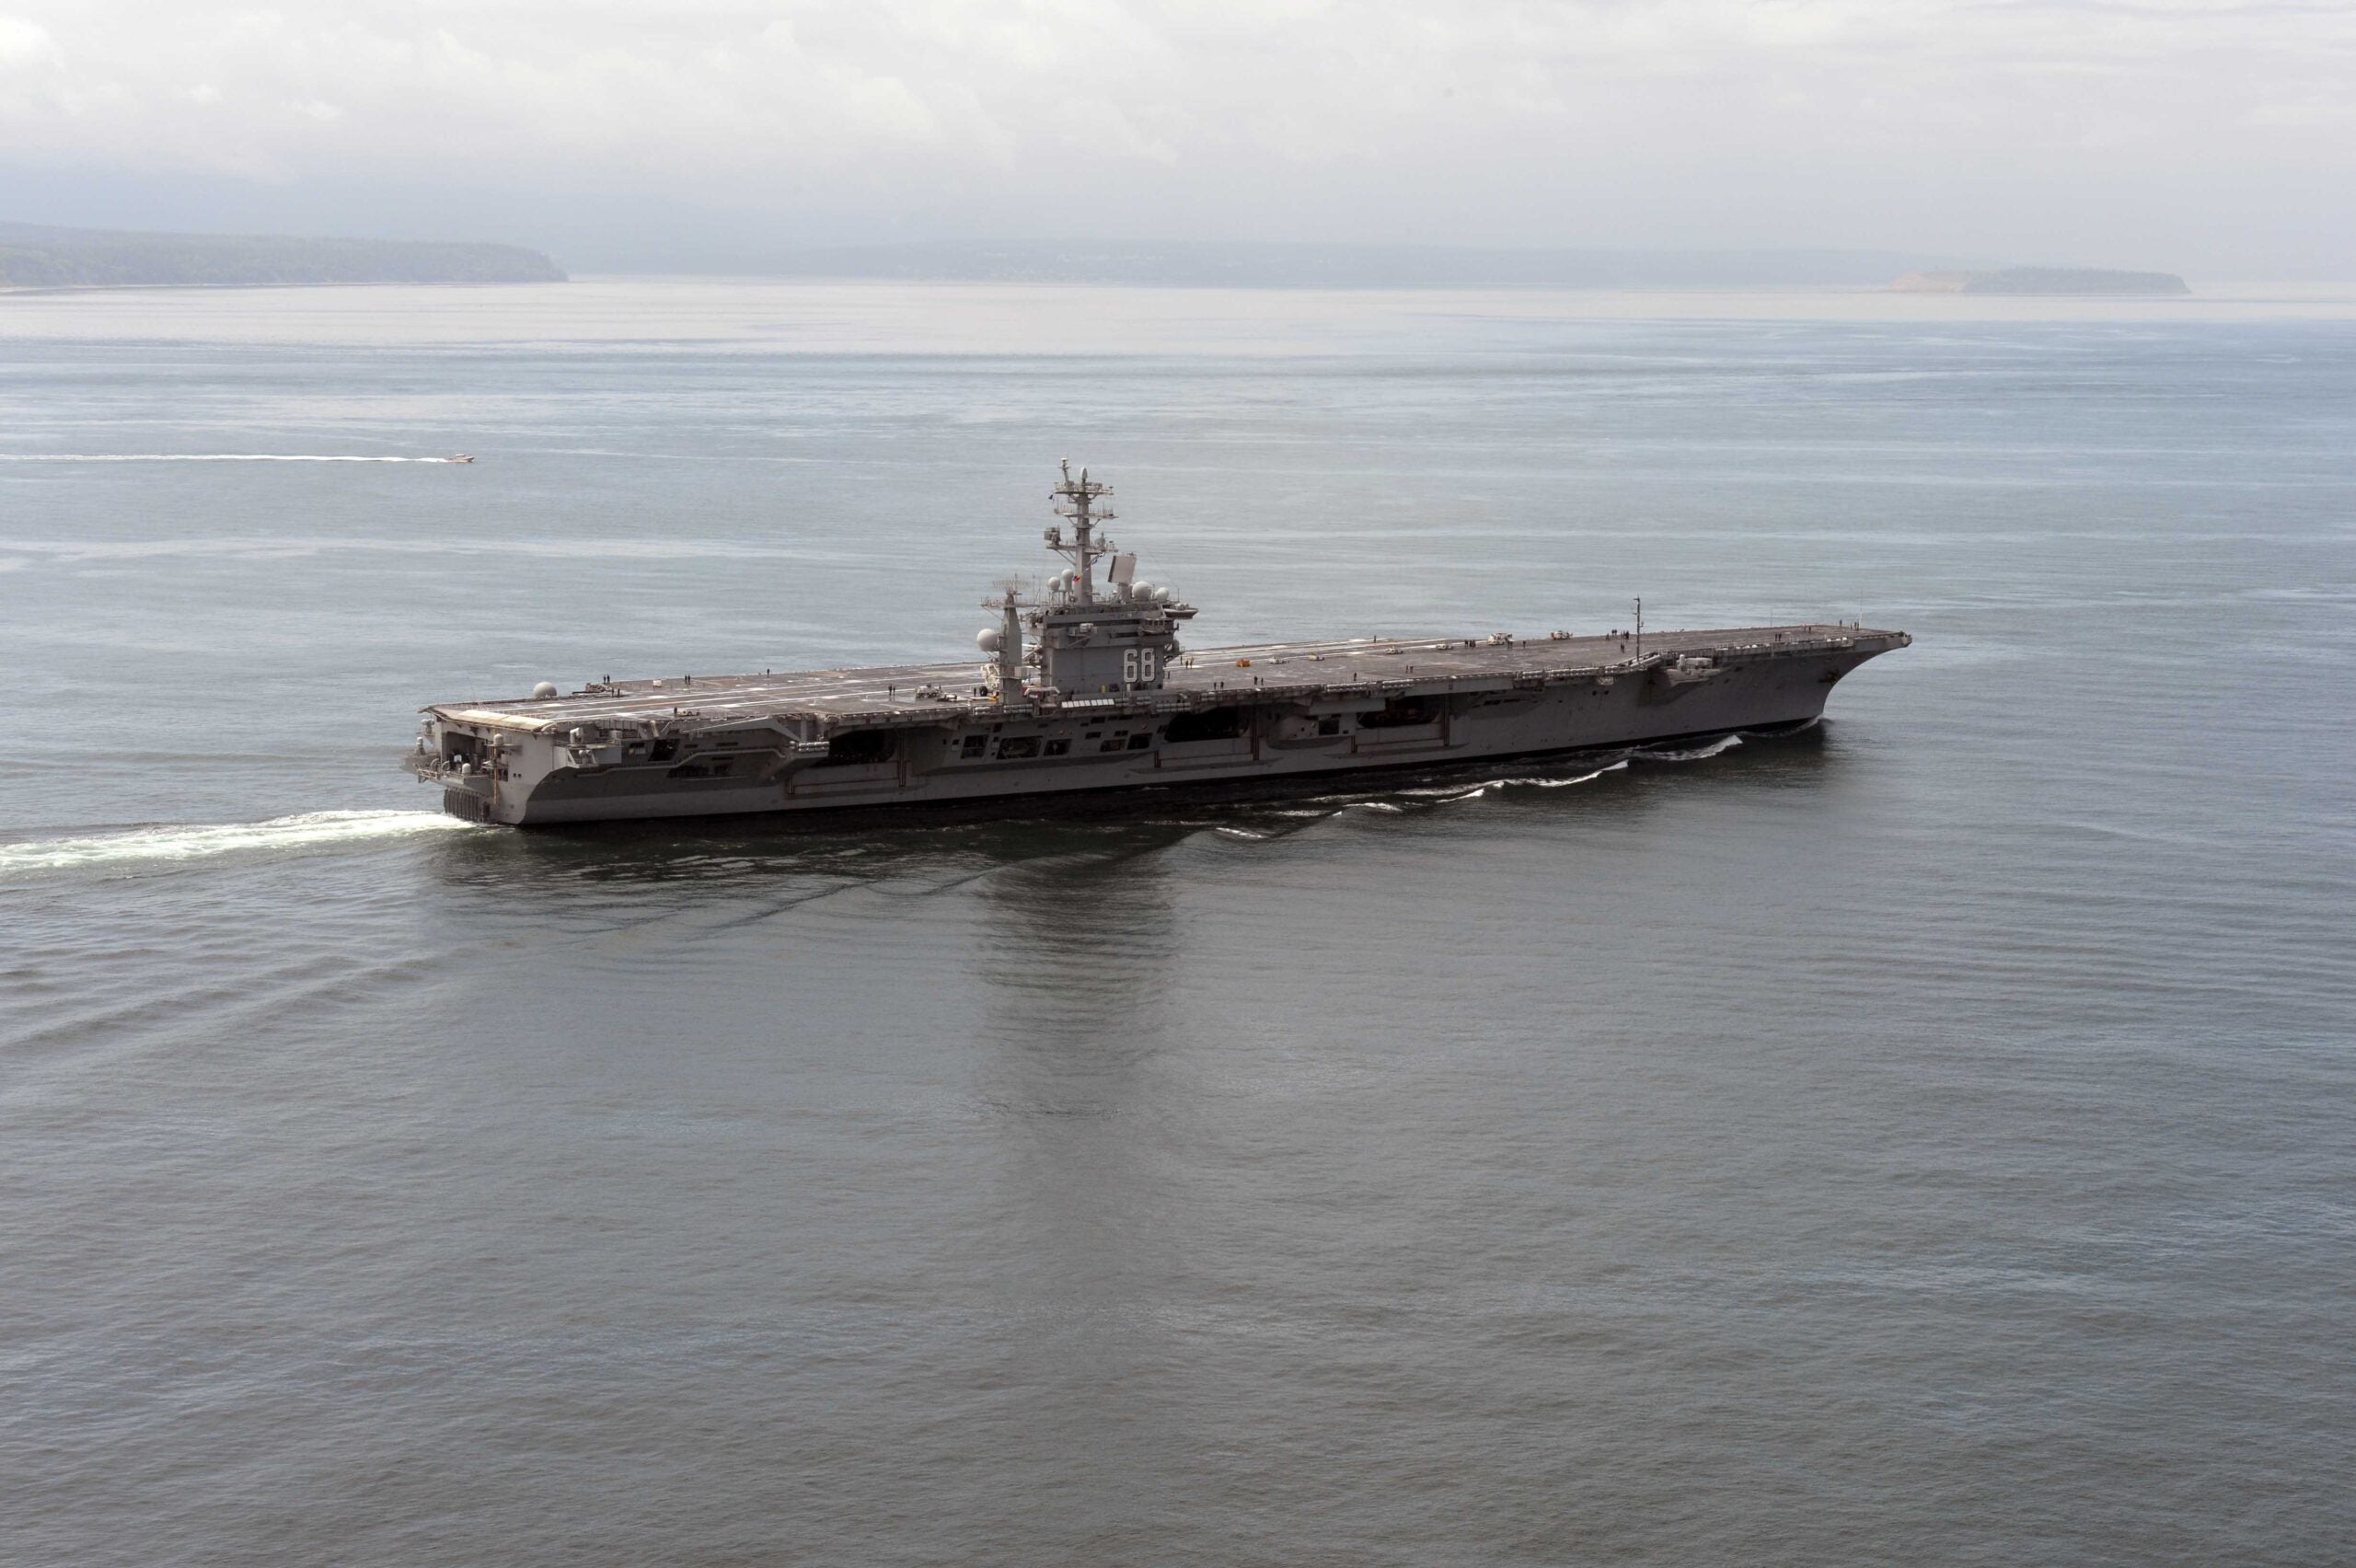 The aircraft carrier USS Nimitz (CVN 68) transits the Strait of Juan de Fuca in Washington June 13, 2014. The Nimitz was underway hosting a friends and family day where nearly 400 civilian guests joined the ship's crew for a one-day underway. (U.S. Navy photo by Mass Communication Specialist 2nd Class John Hetherington/Released)